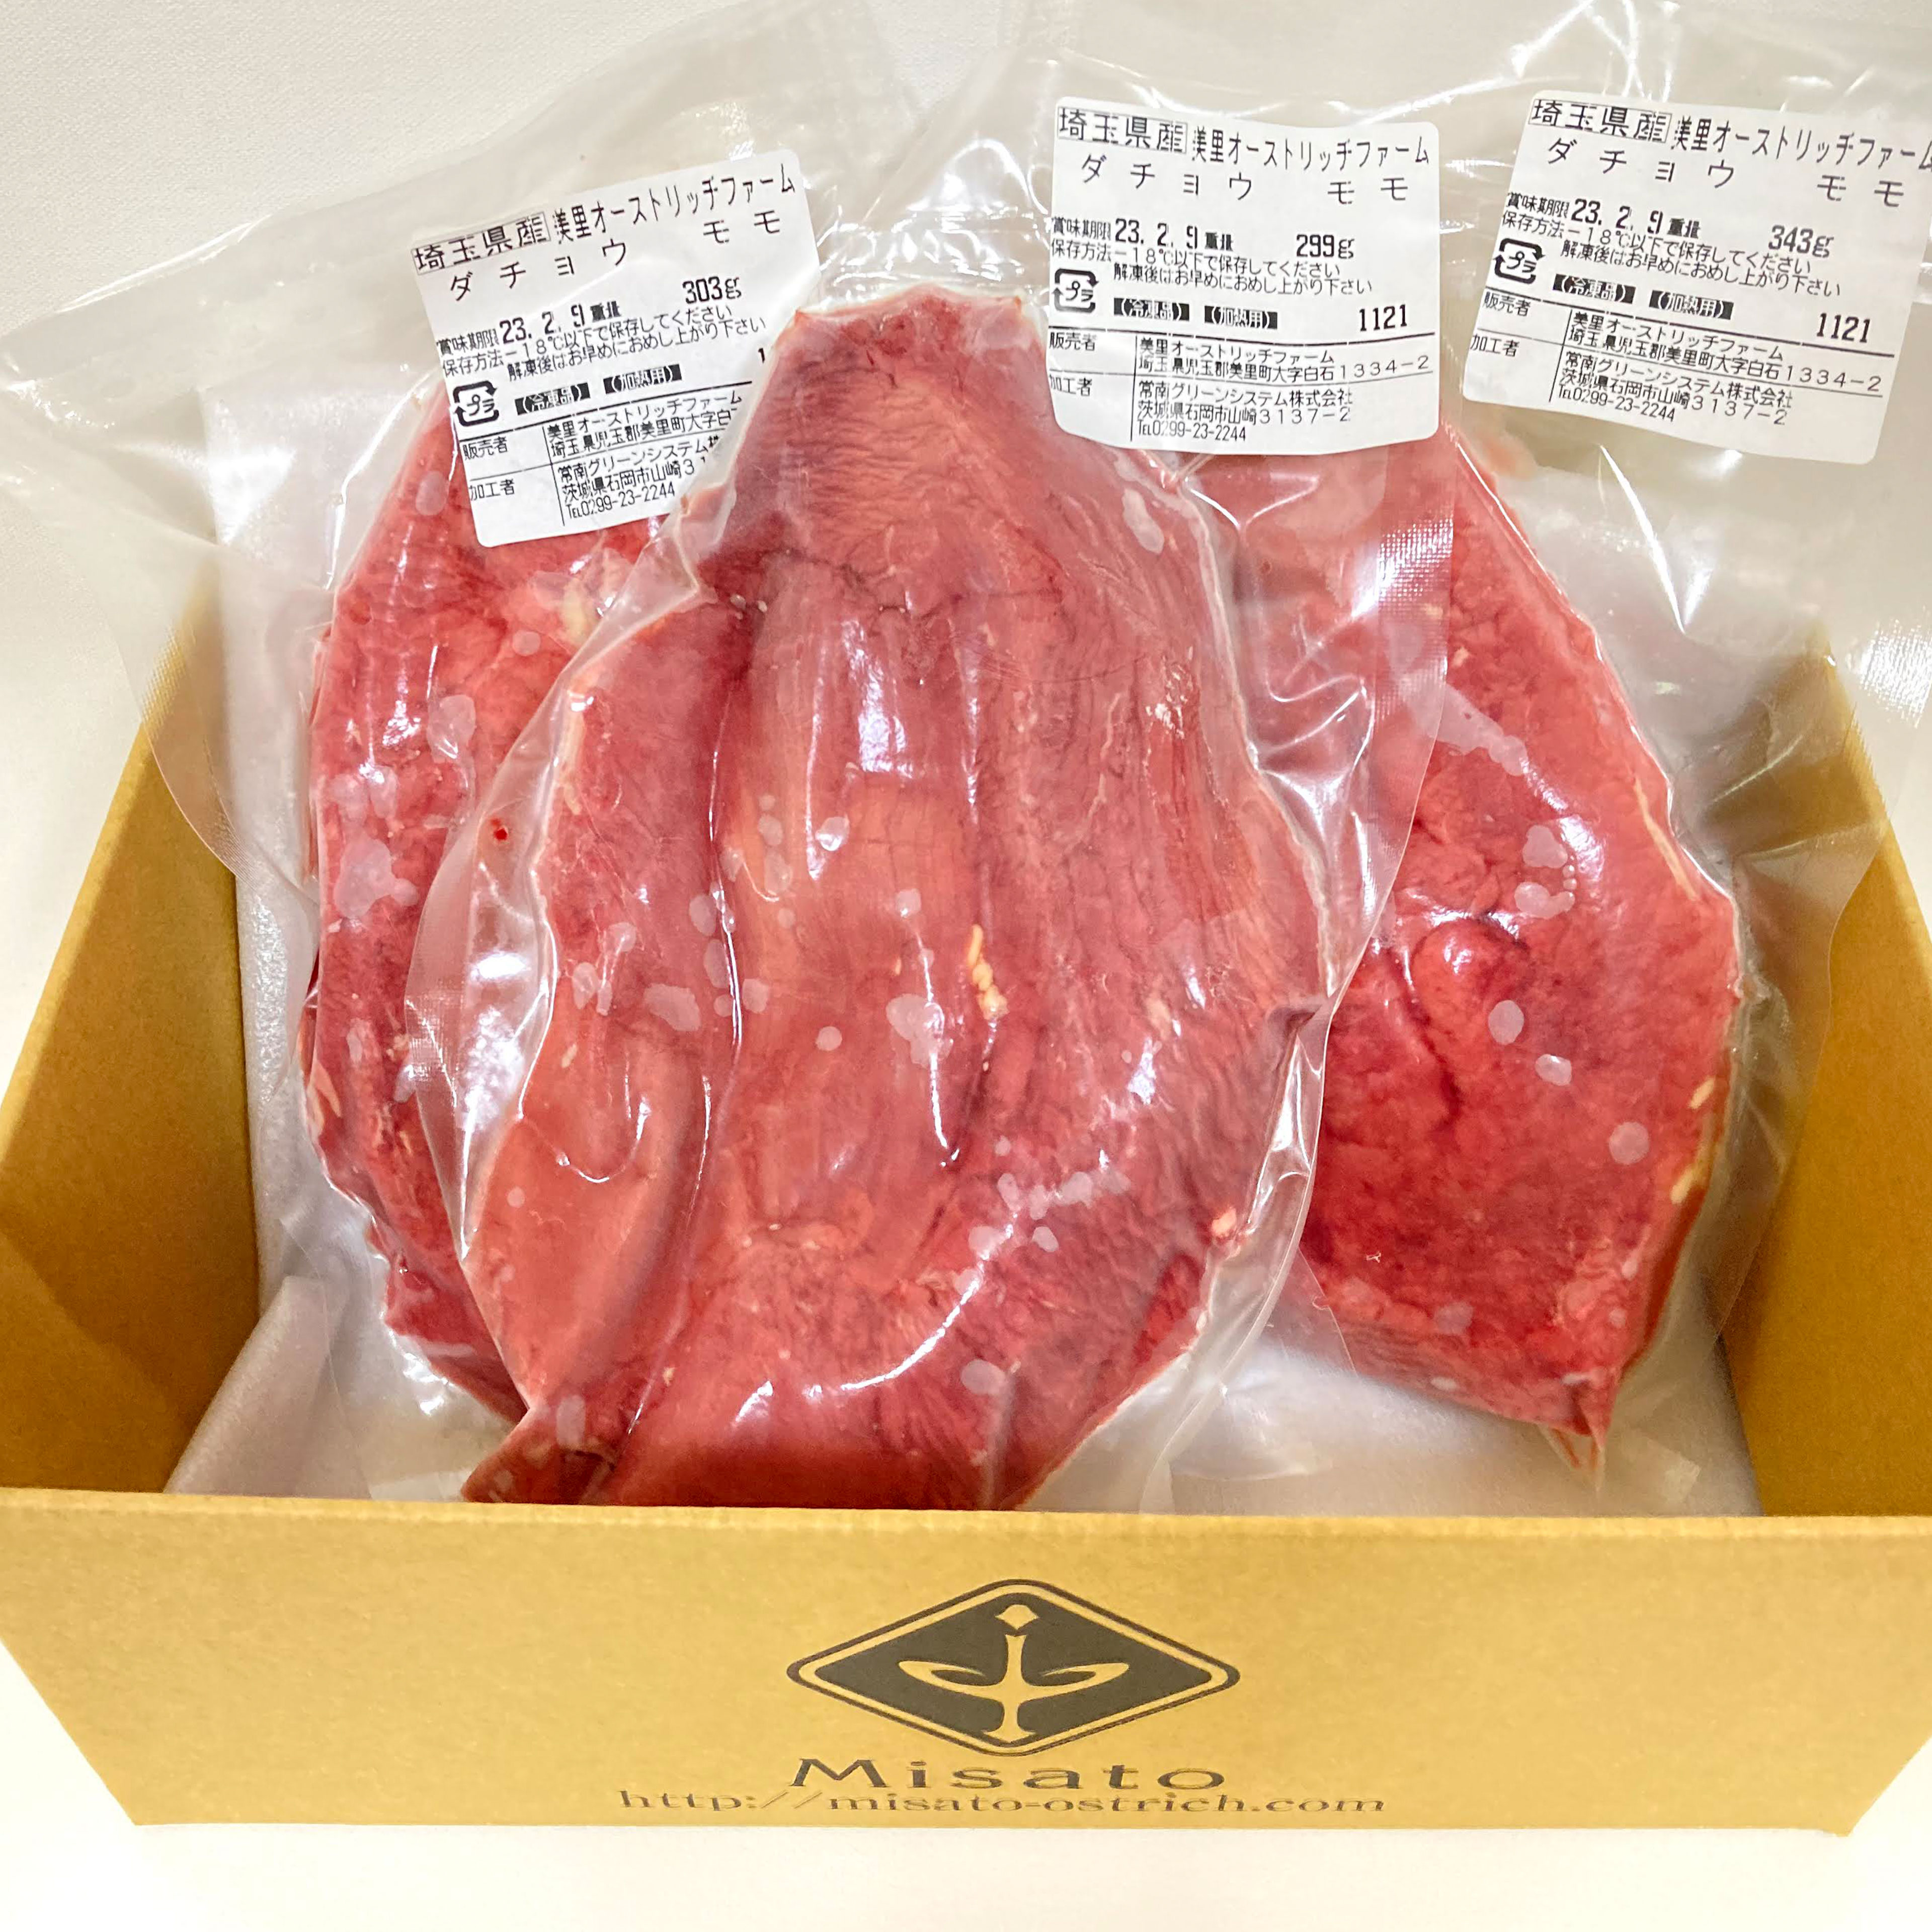  domestic production ostrich out Momo meat 1kg ostrich meal meat healthy low calorie yakiniku jibie barbecue 